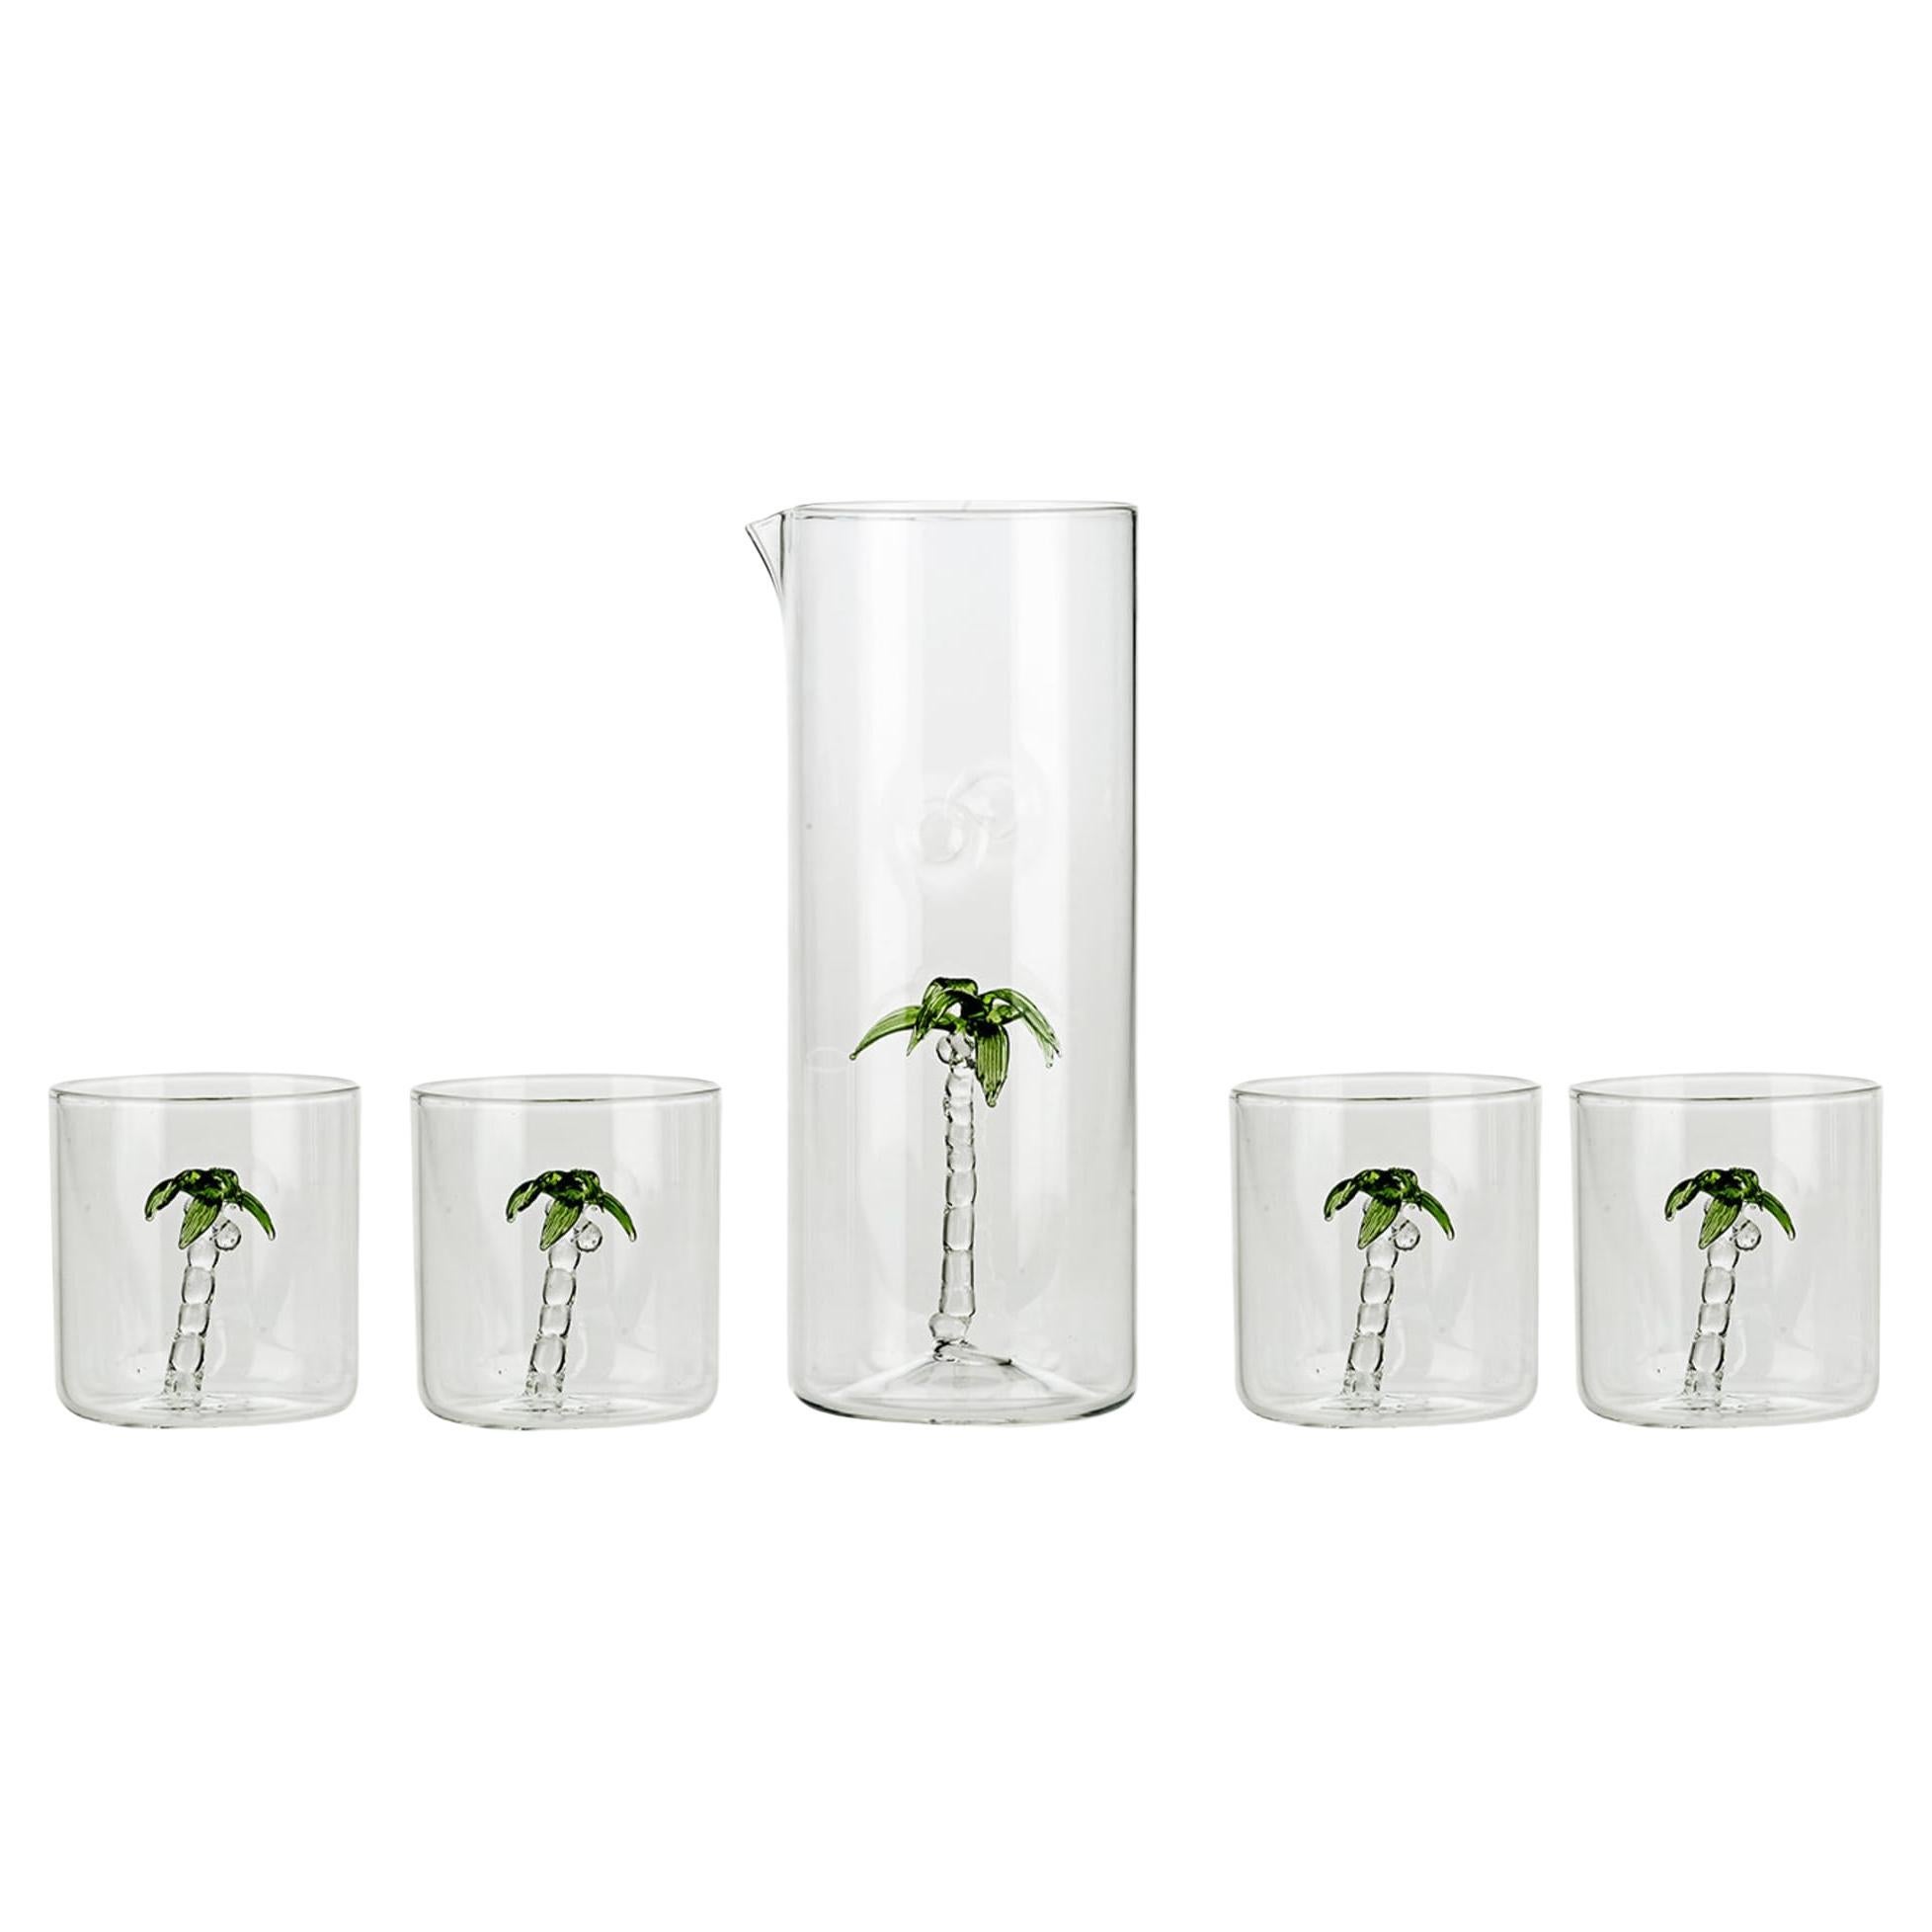 Palma Set of 4 Glasses and Pitcher